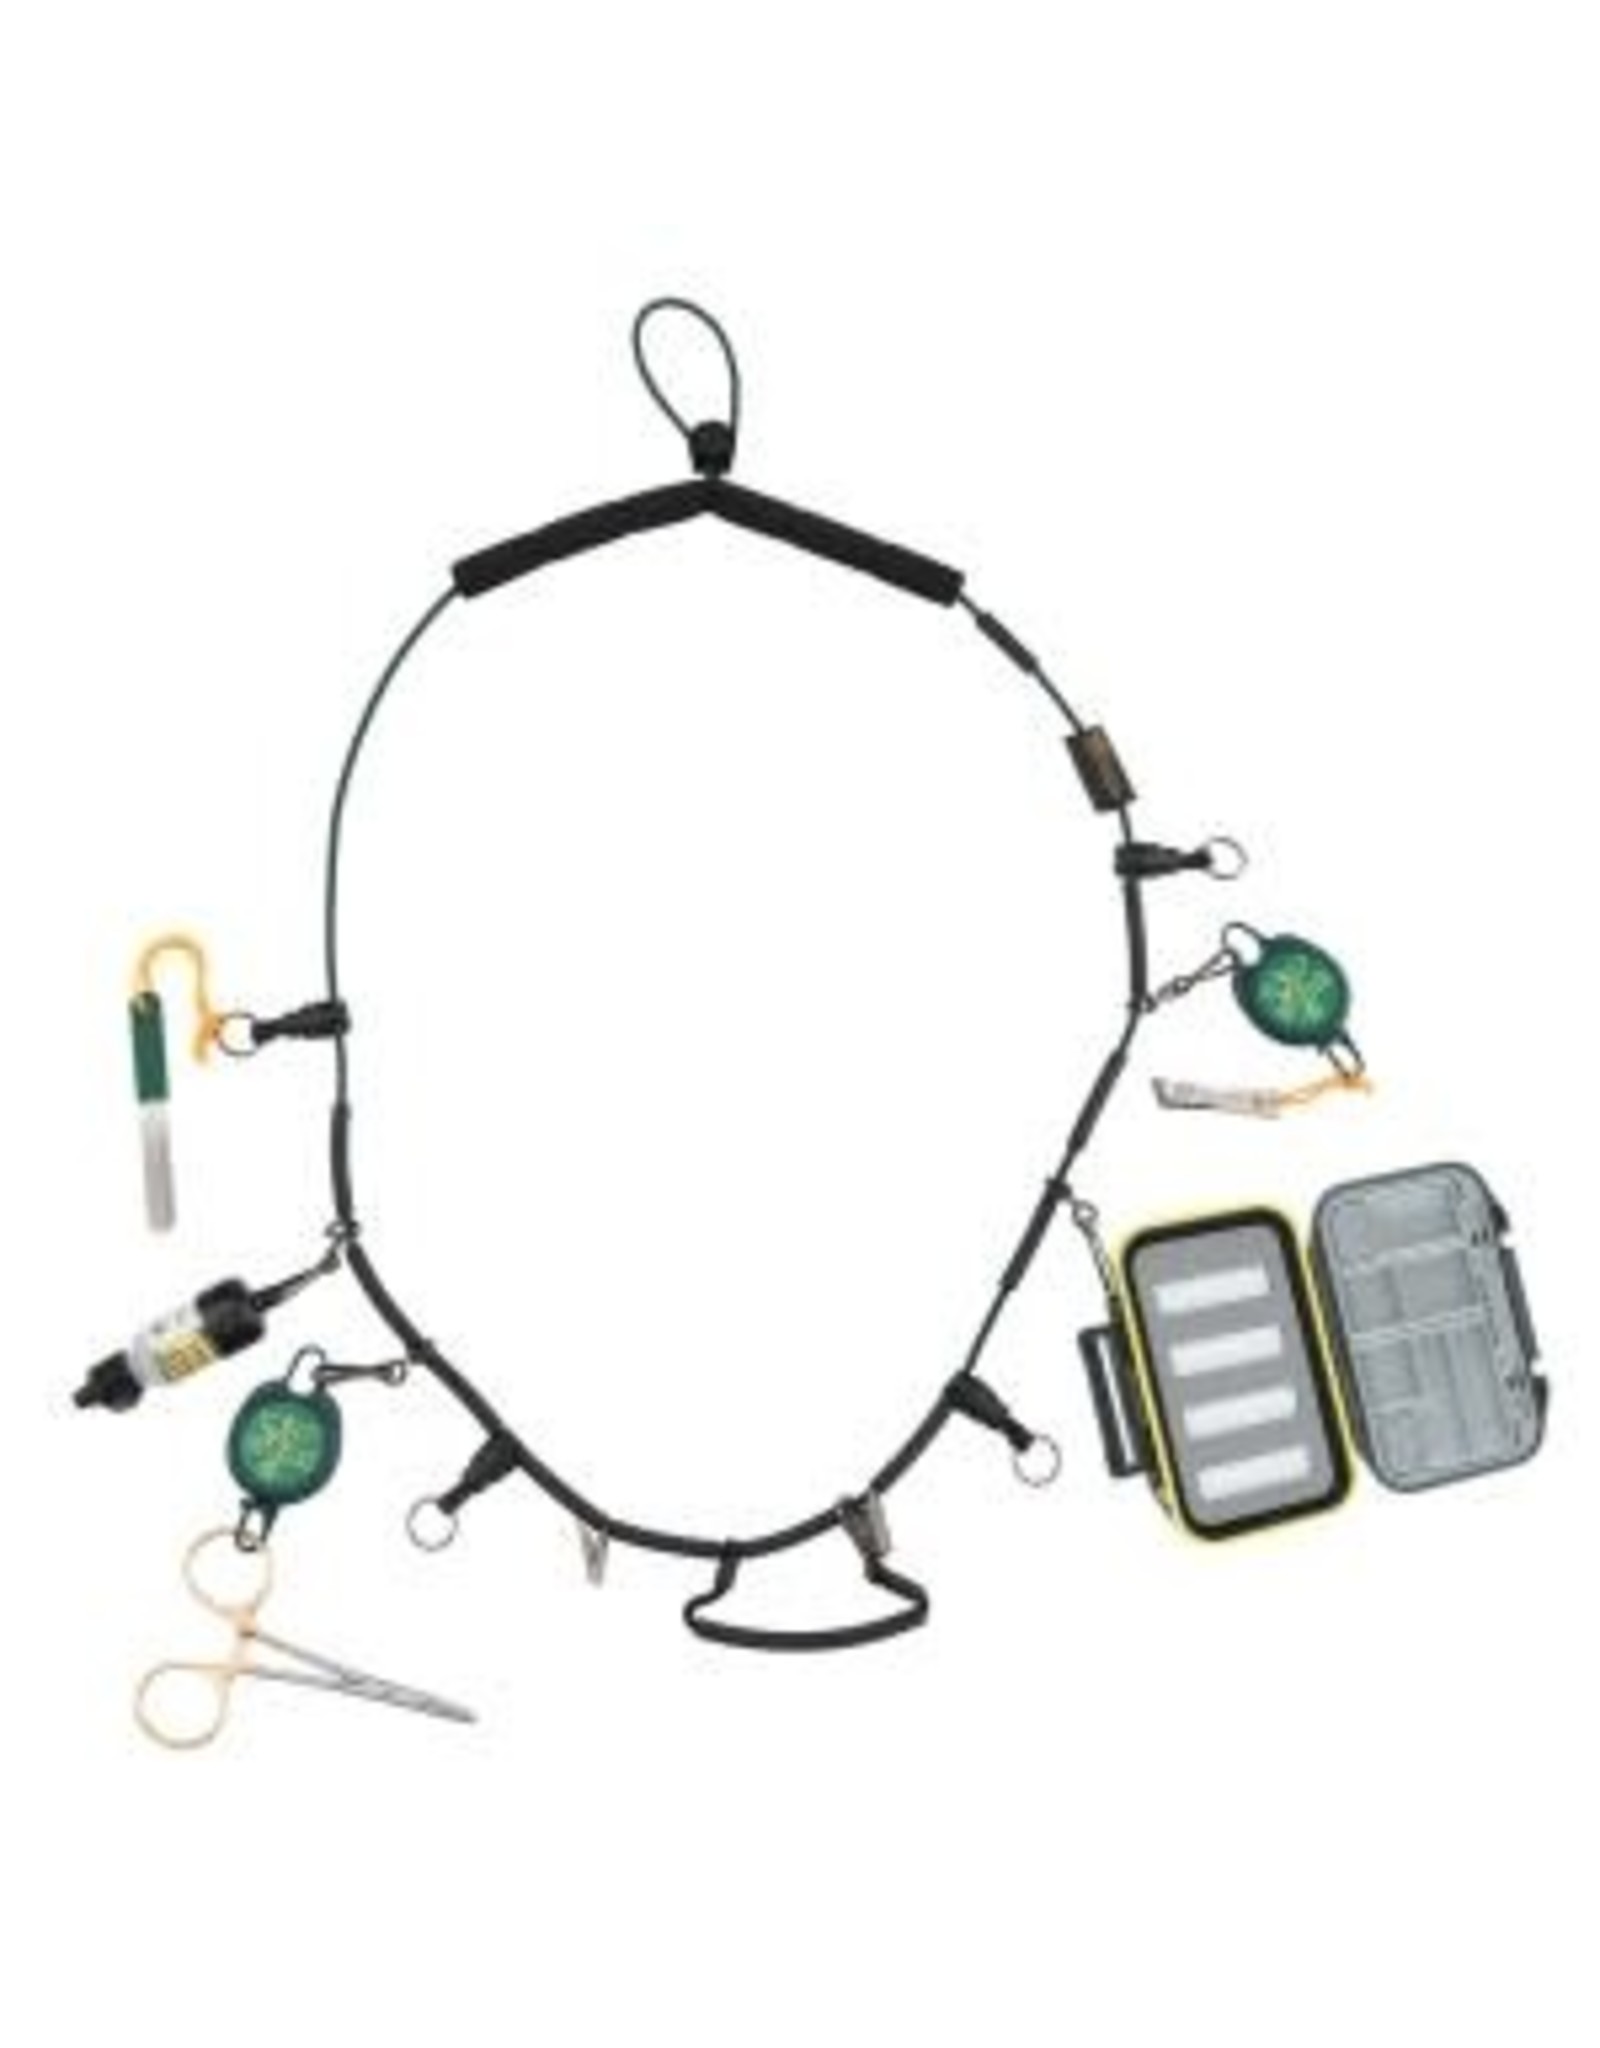 Dr. Slick Dr. Slick Fully Loaded Necklace with  Nipper, Clamp, Hook File and Bug Jelly